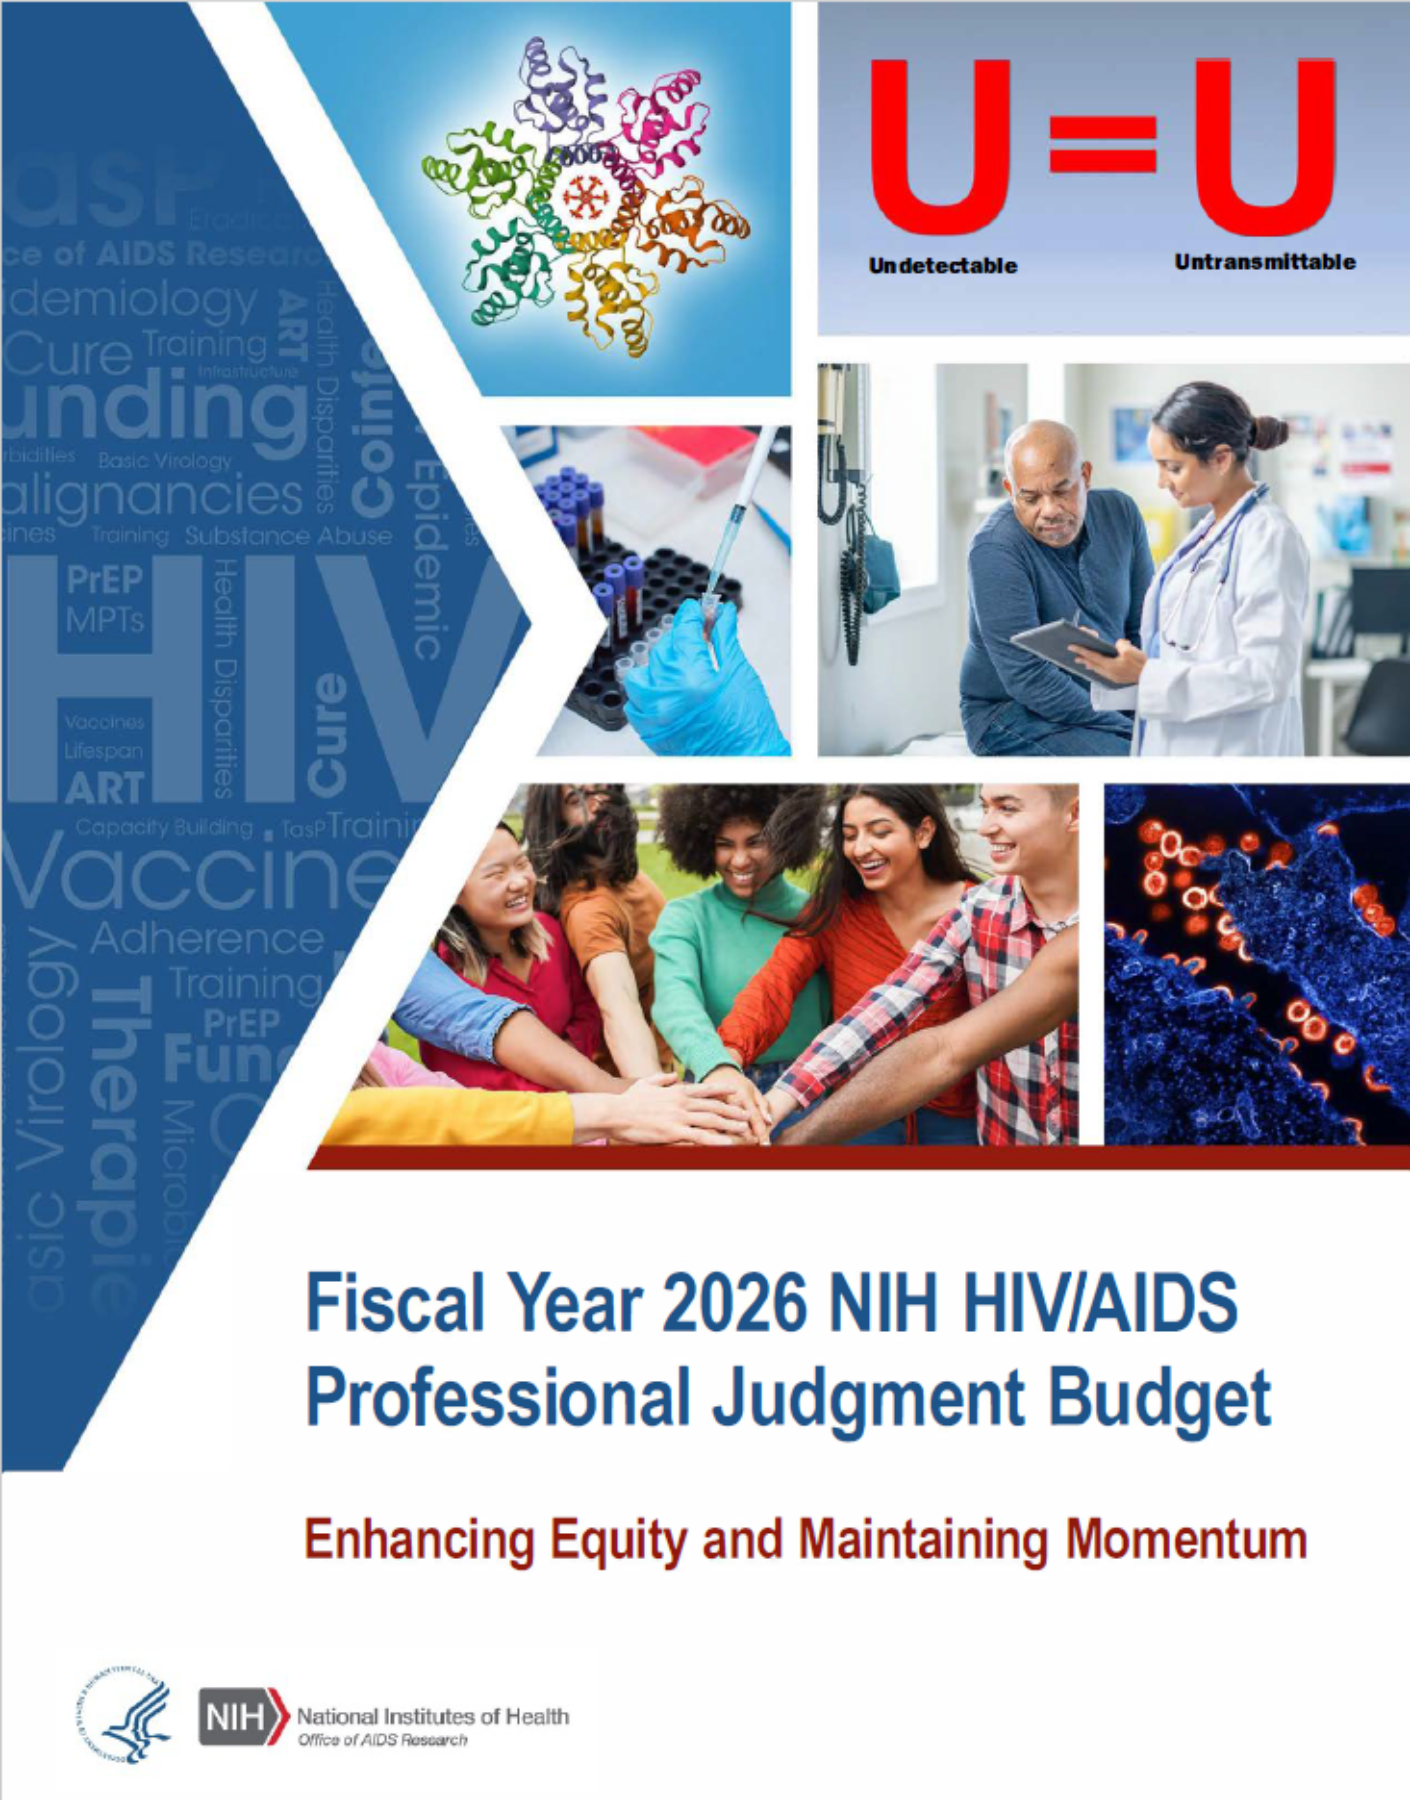 Fiscal Year 2026 NIH HIV/AIDS Professional Judgment Budget Poster